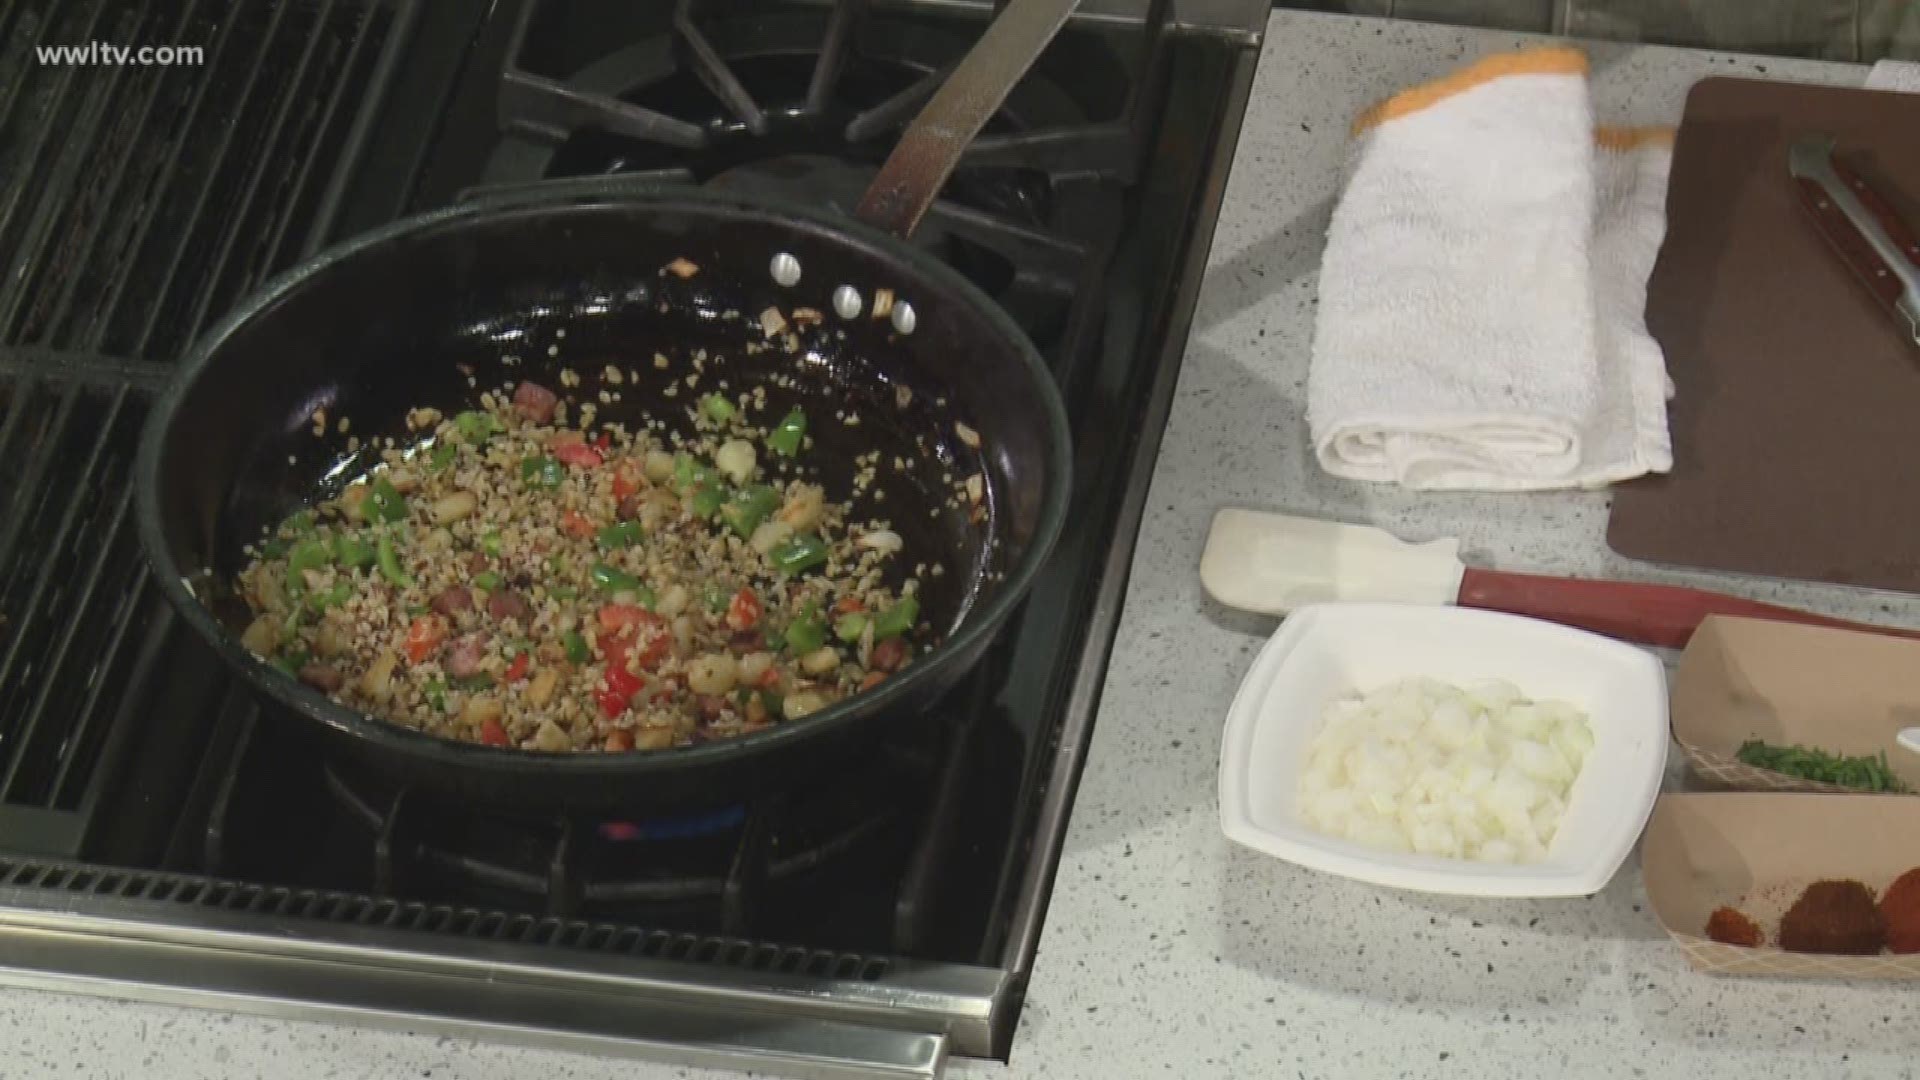 Jason Ziobrowski is in town for the American Culinary Federation's Conference and is here to show us how to make jambalaya for breakfast.